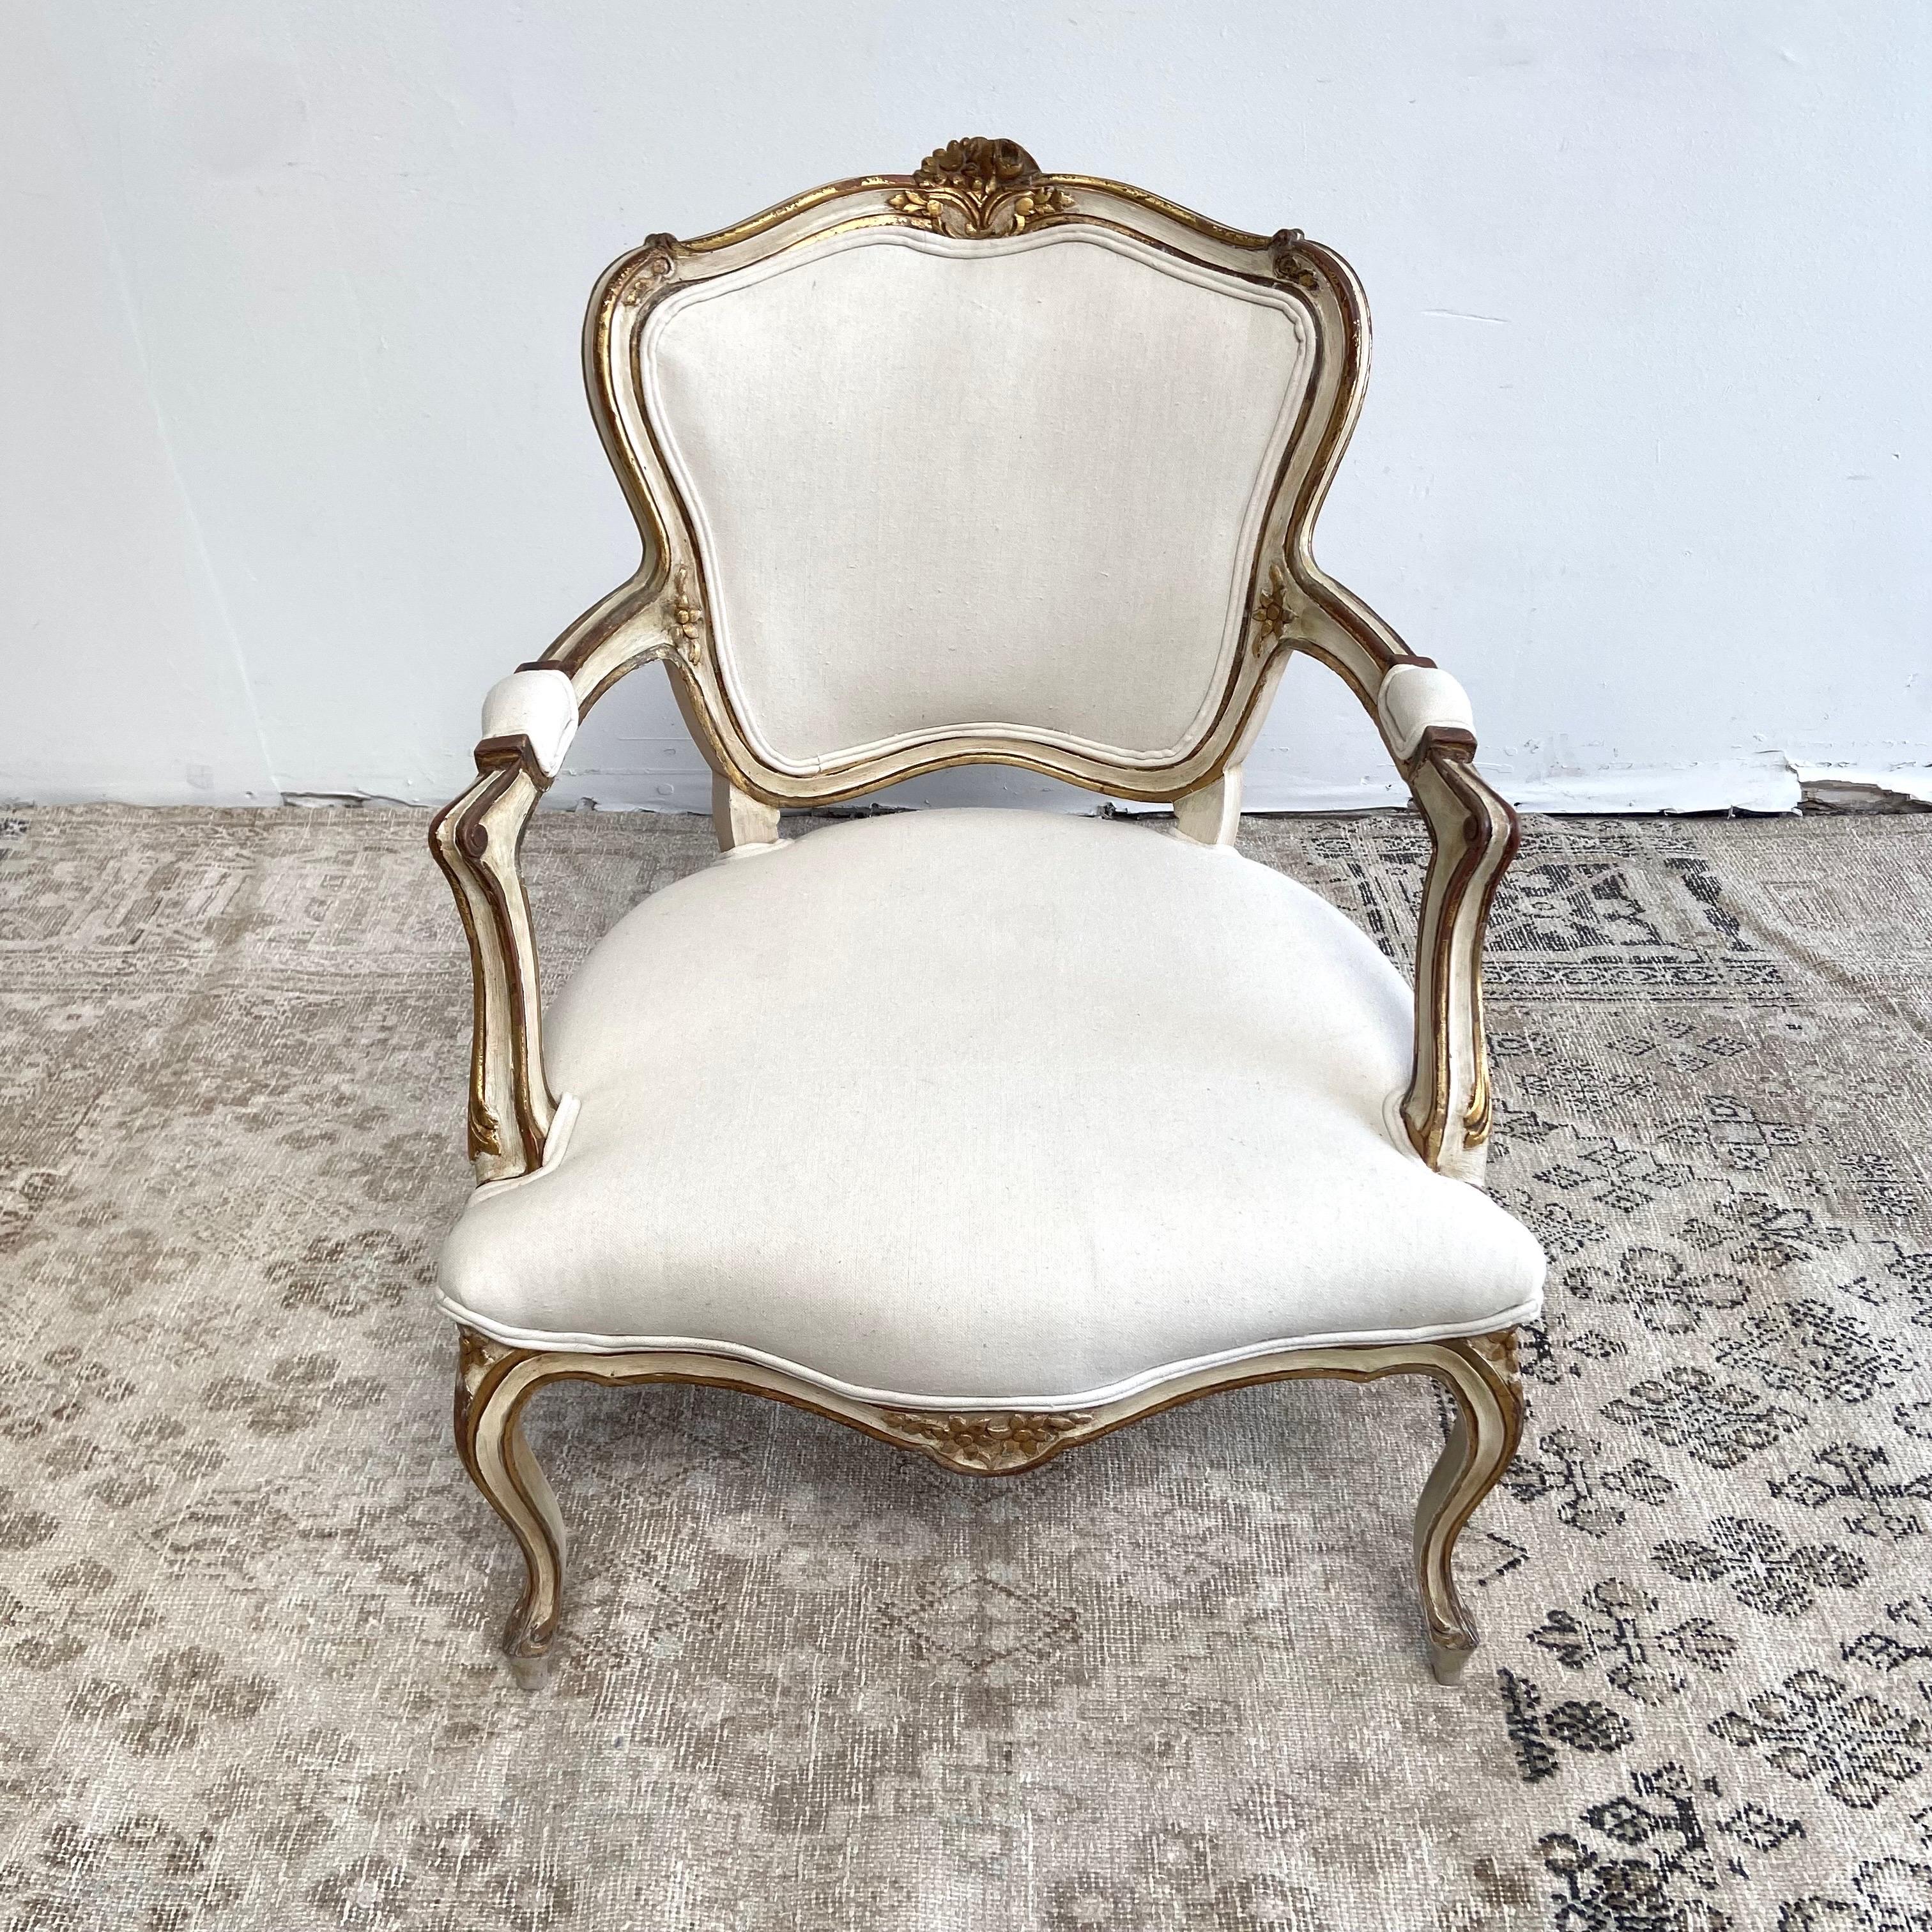 Vintage Open Arm Chair with Original Paint and Gilt Wood Finish In Good Condition For Sale In Brea, CA